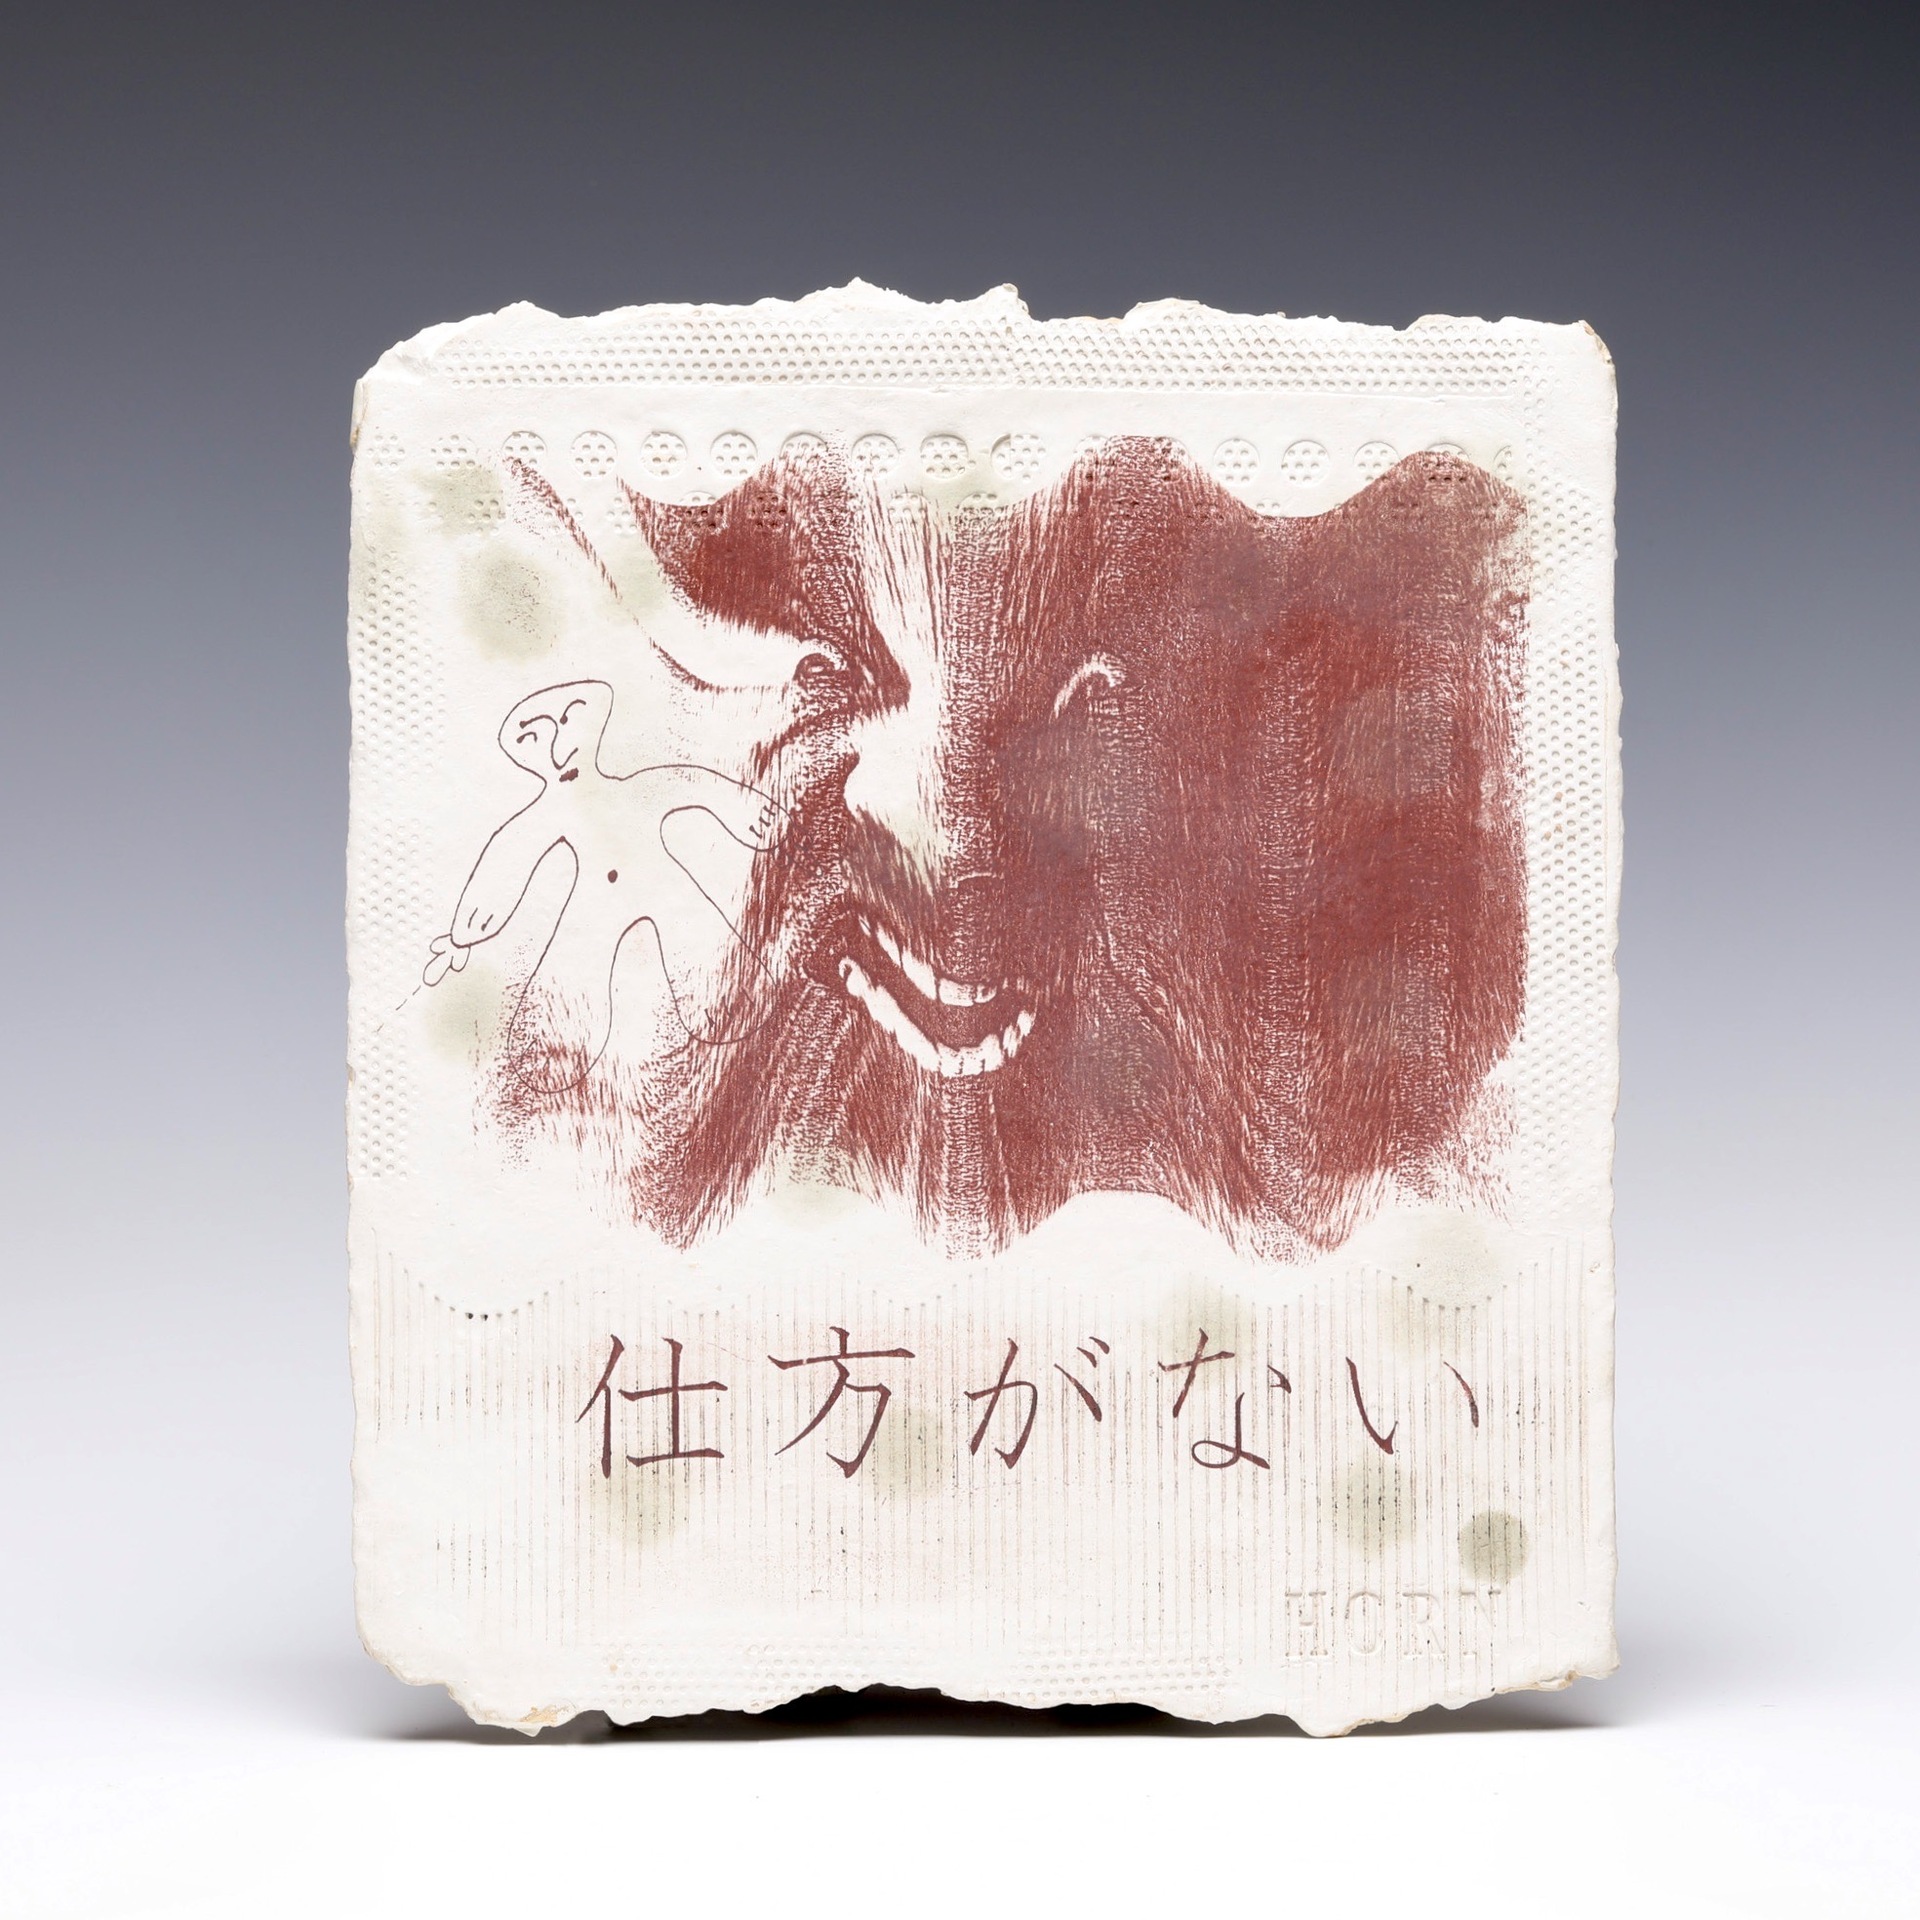 Stephen Horn ceramic, paper and clay sculpture with Japanese characters and a distorted face and figure